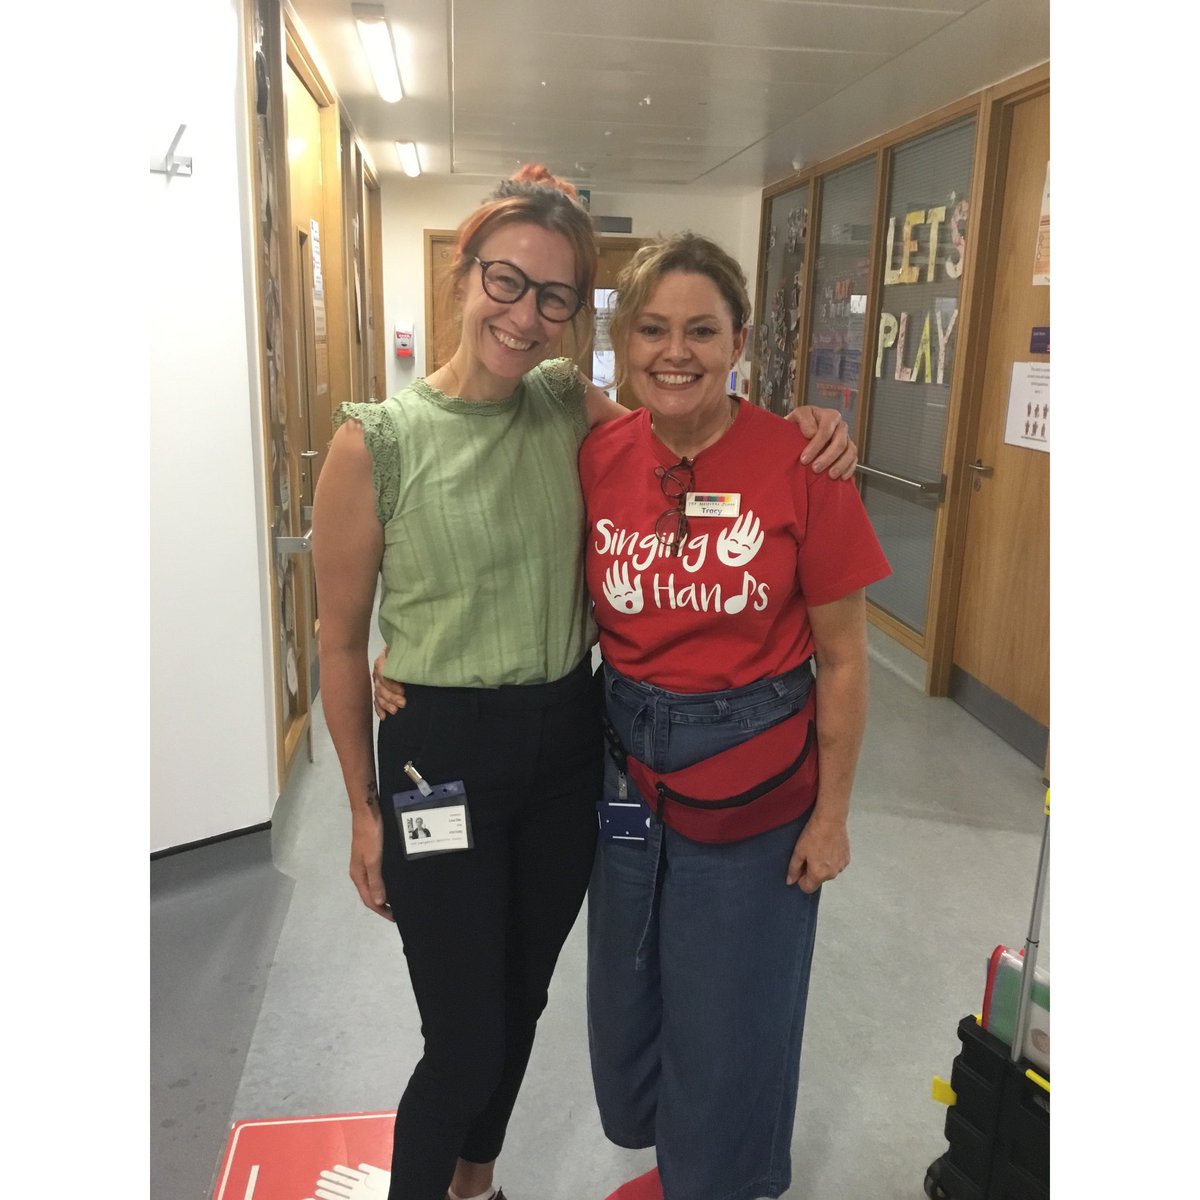 Had a wonderful day visiting @GOSH_School this week where I saw some fantastic learning taking place and met this lady @singinghands in person. Thank you to all the fantastic teachers who allowed me to be part of their lessons. 
#hospitaleducation @NAHEUK